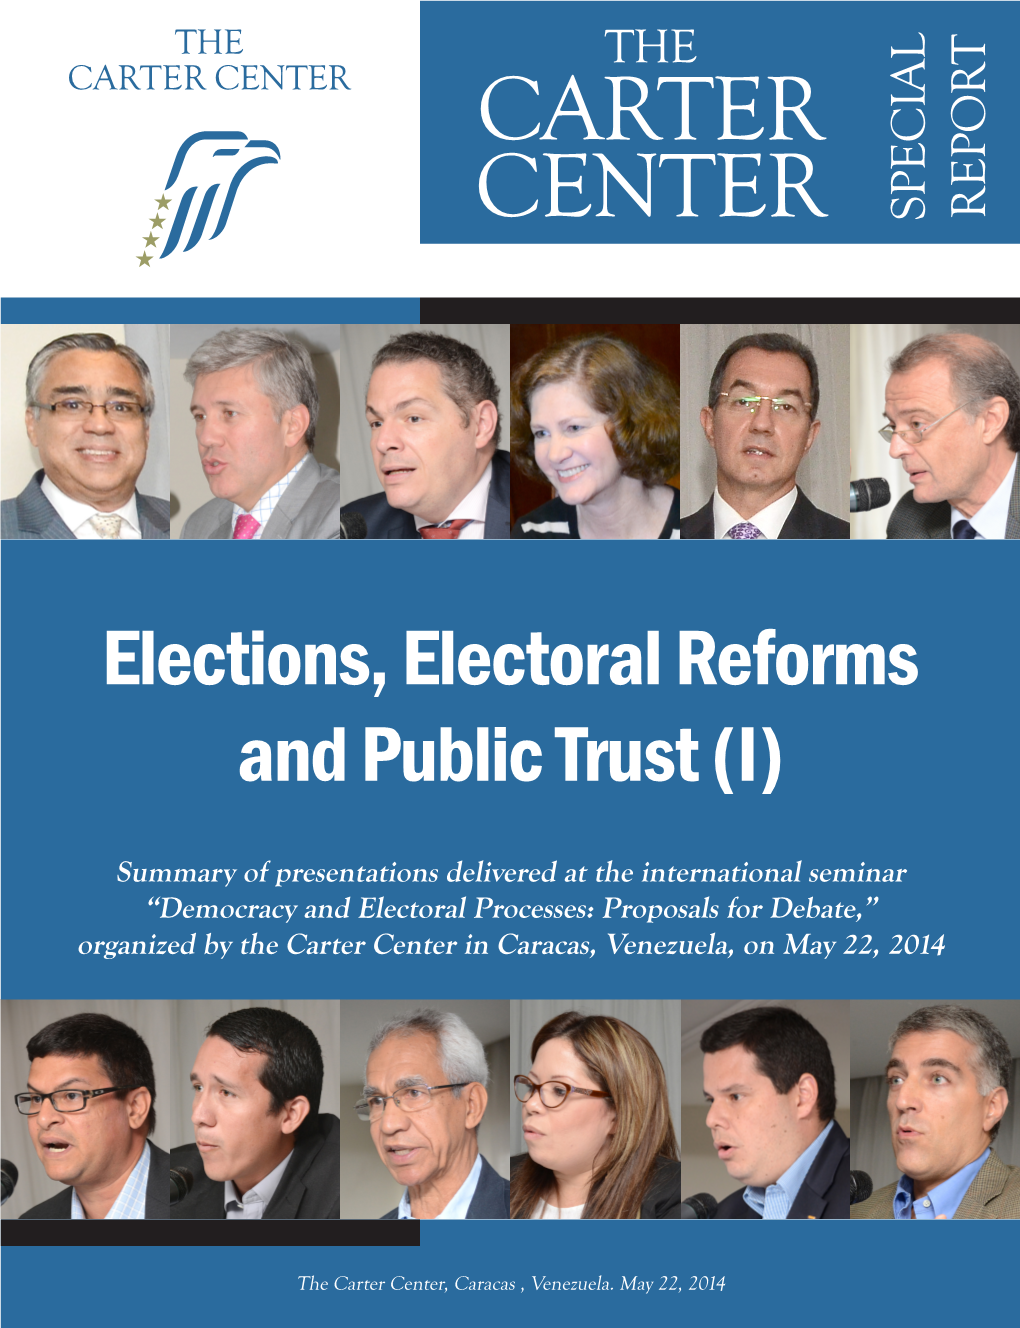 Elections, Electoral Reforms and Public Trust (I)